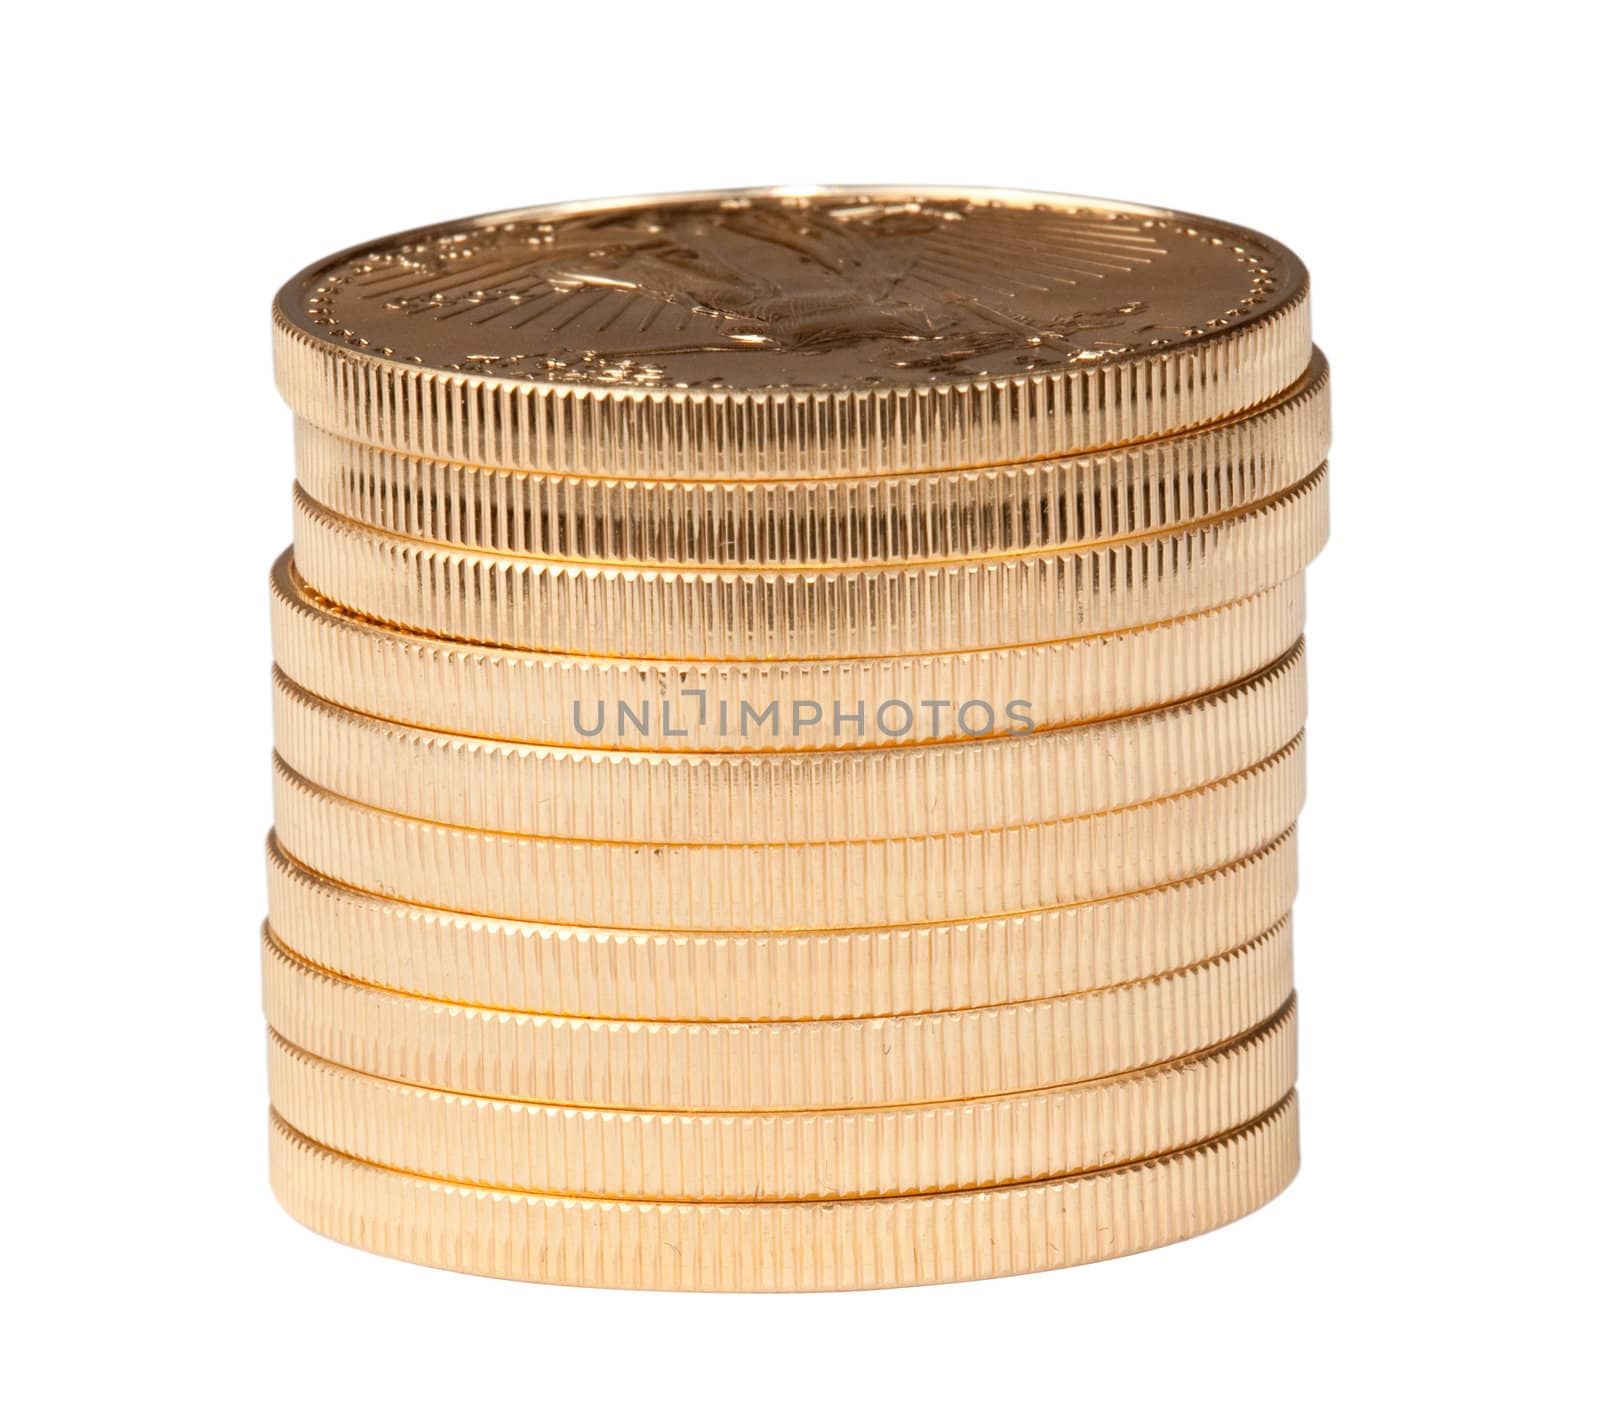 Stack of ten pure gold coins by steheap